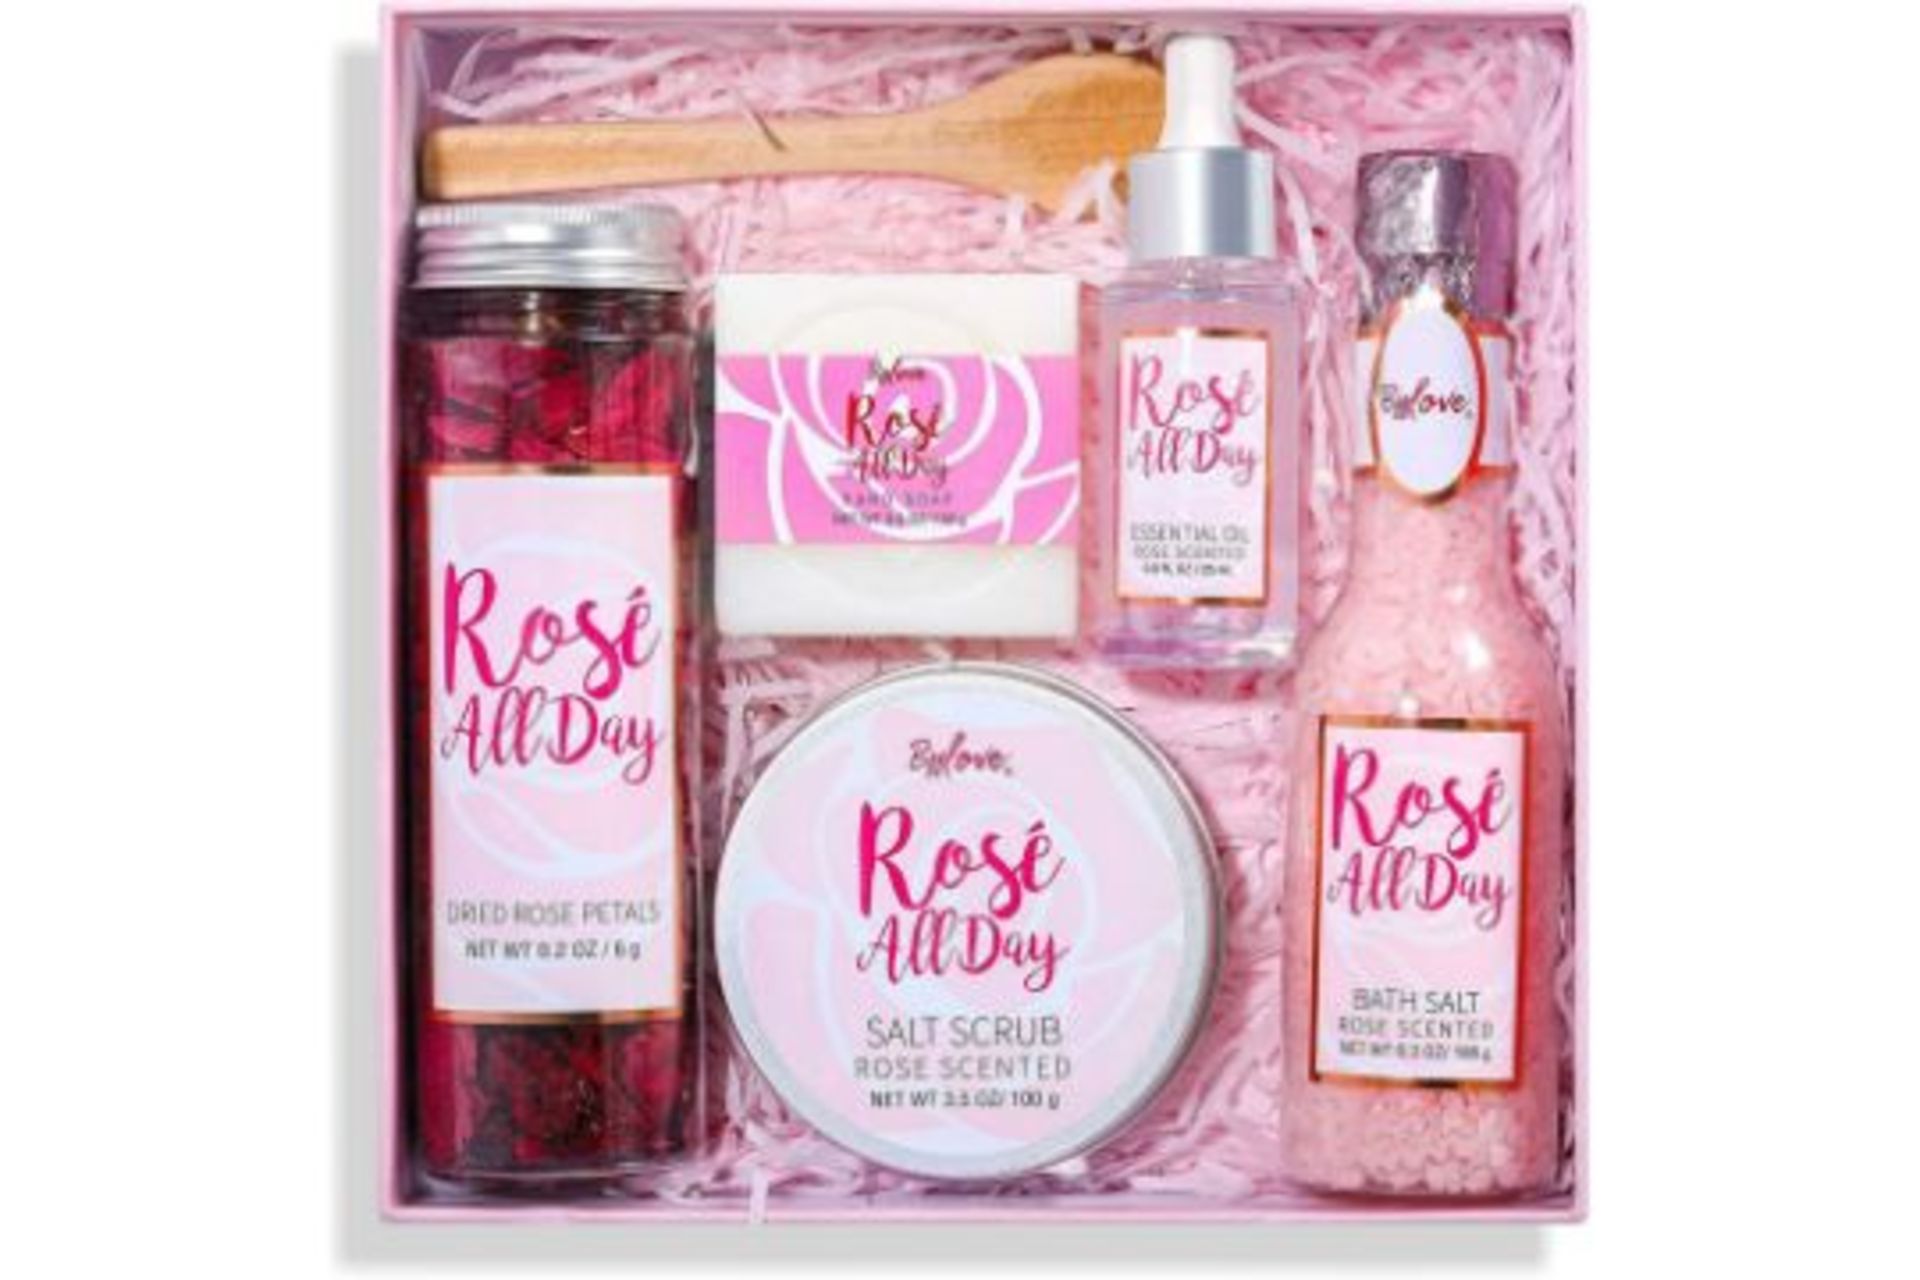 6 X NEW PACKAGED Rose All Day Bath Gift Box. (SKU:BFF-BP-11) Best Gift Set for Women - Our spa - Image 2 of 2